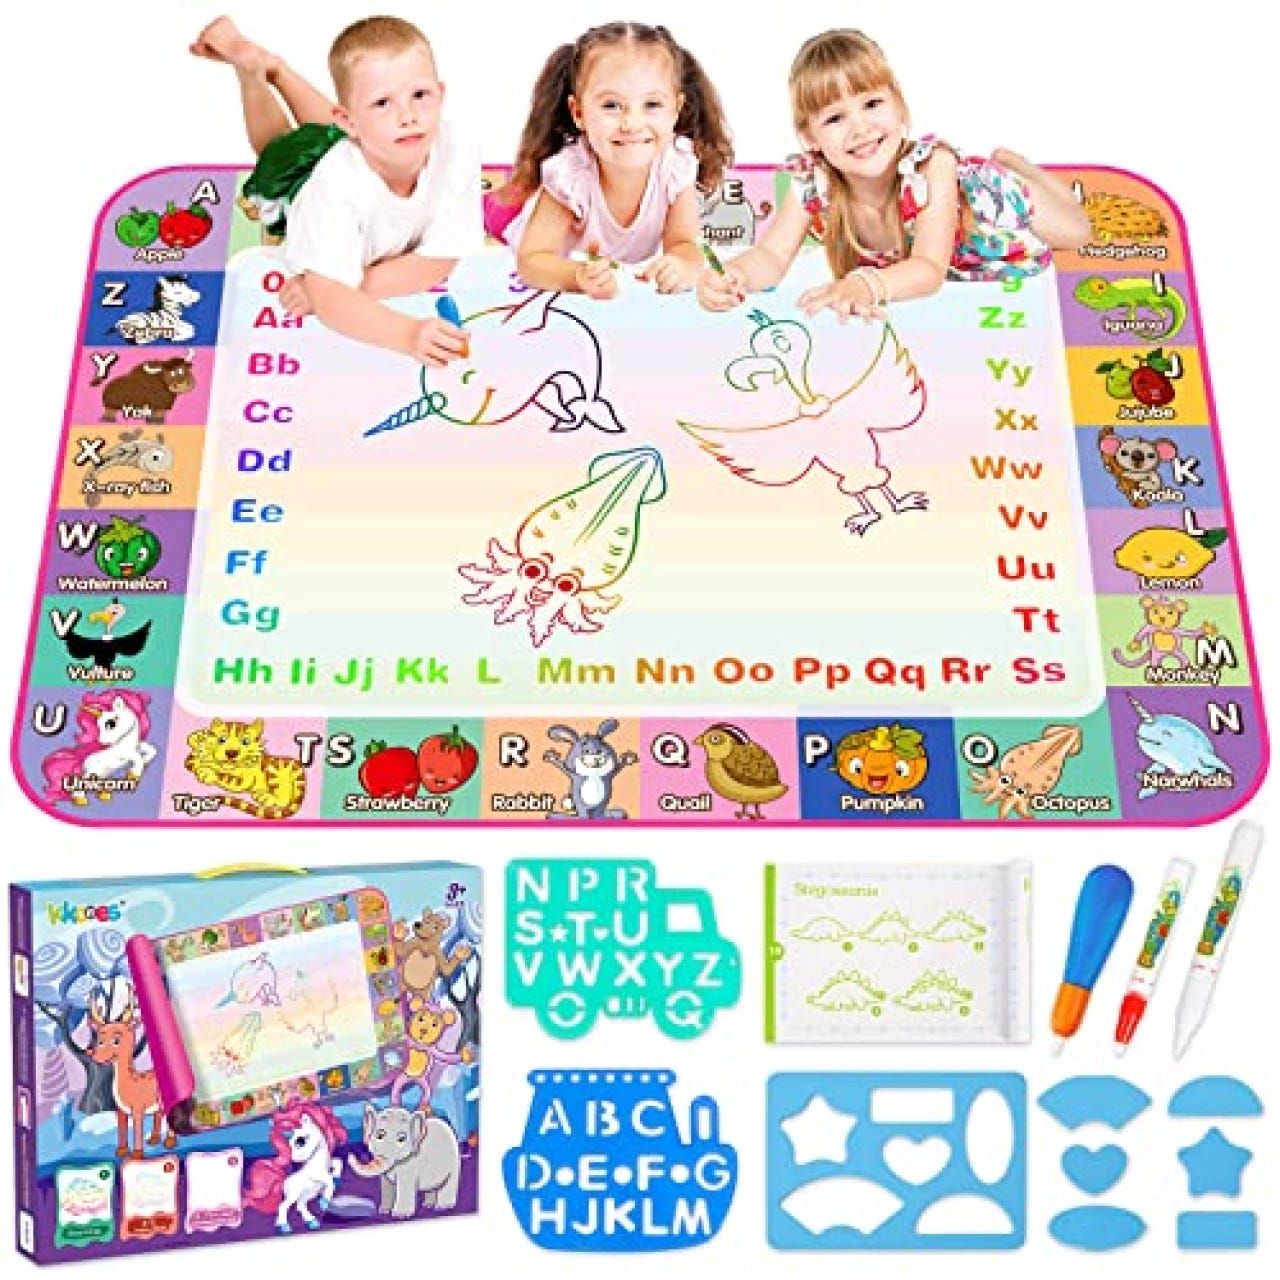 Aqua Coloring Mat,Kids Toys Large Water Painting Mat,Toddlers Doodle Pad  with 4 Colors,Gifts for Girls Boys Age 3 4 5+ Years Old,4 Pens,Drawing  Molds and Booklet Included